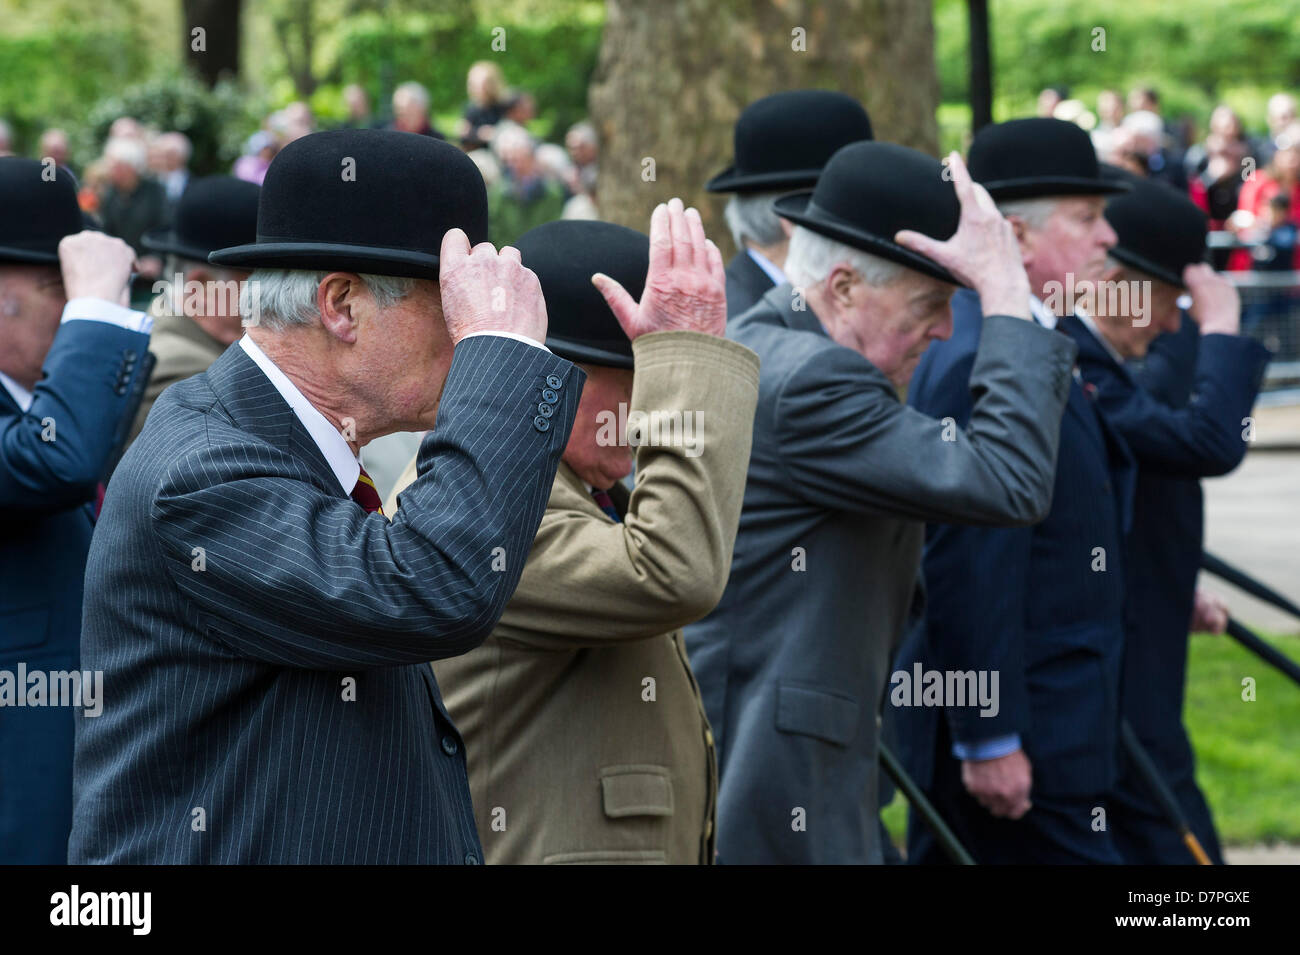 Hyde Park, London, UK 12 may 2013. Her Royal Highness The Princess Royal KG, KT, GCVO, Colonel in Chief The King’s Royal Hussars takes the salute and lays a wreath at the Annual Parade and Service of The Combined Cavalry Old Comrades Association at the Cavalry Memorial. Officers wear bowler hats and suits are worn instead of uniform by all but the bands.  5 bands led marching detachments of the Cavalry and Yeomanry Regimental Associations and Veterans ranging from World War 2 to Iraq and Afghanistan. State Trumpeters of the Household Cavalry and a Piper from F Company The Scots Guards also too Stock Photo